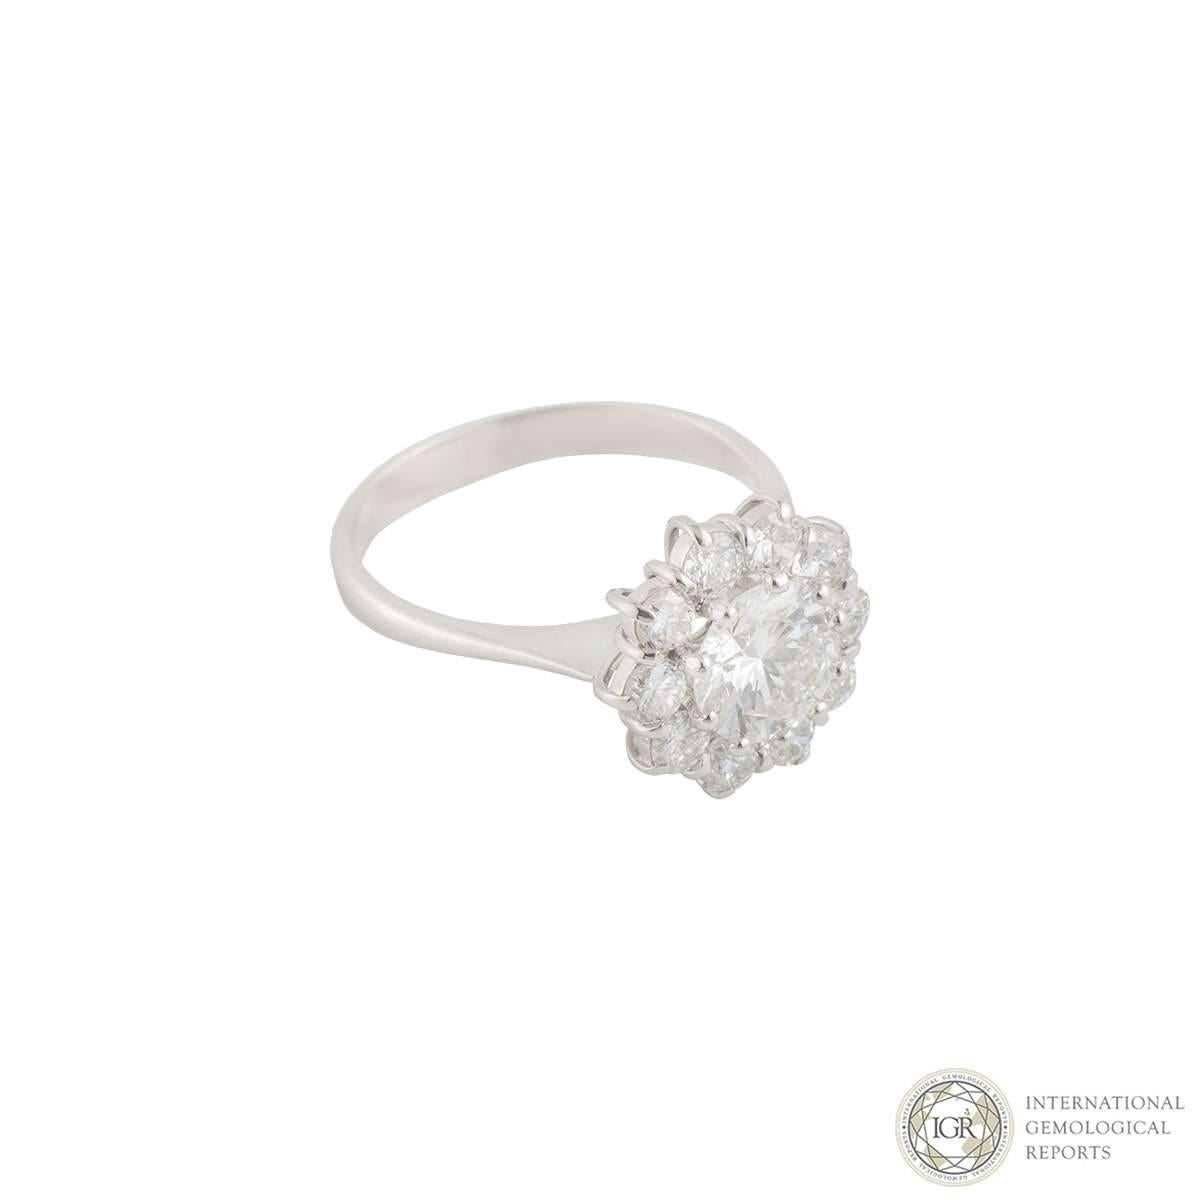 A beautiful 18k white gold diamond ring. The ring is set to the centre with a 1.29ct round brilliant cut diamond, E colour and VS2 clarity. Surrounding the diamond is a halo of 10 round brilliant cut claw set diamonds totalling approximately 0.80ct,